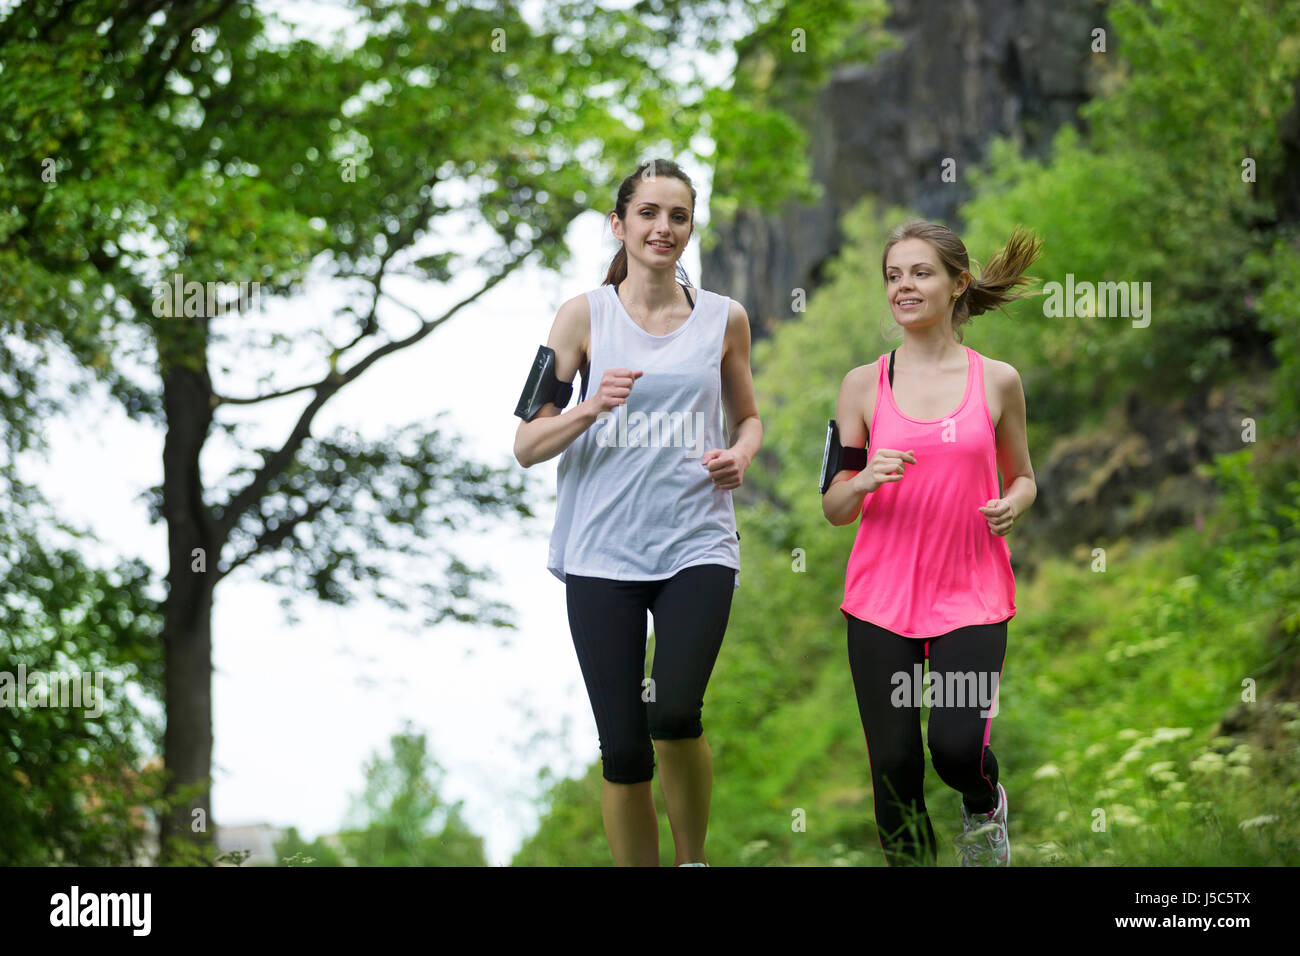 Two athletic women running outdoors. Action and healthy lifestyle concept. Stock Photo